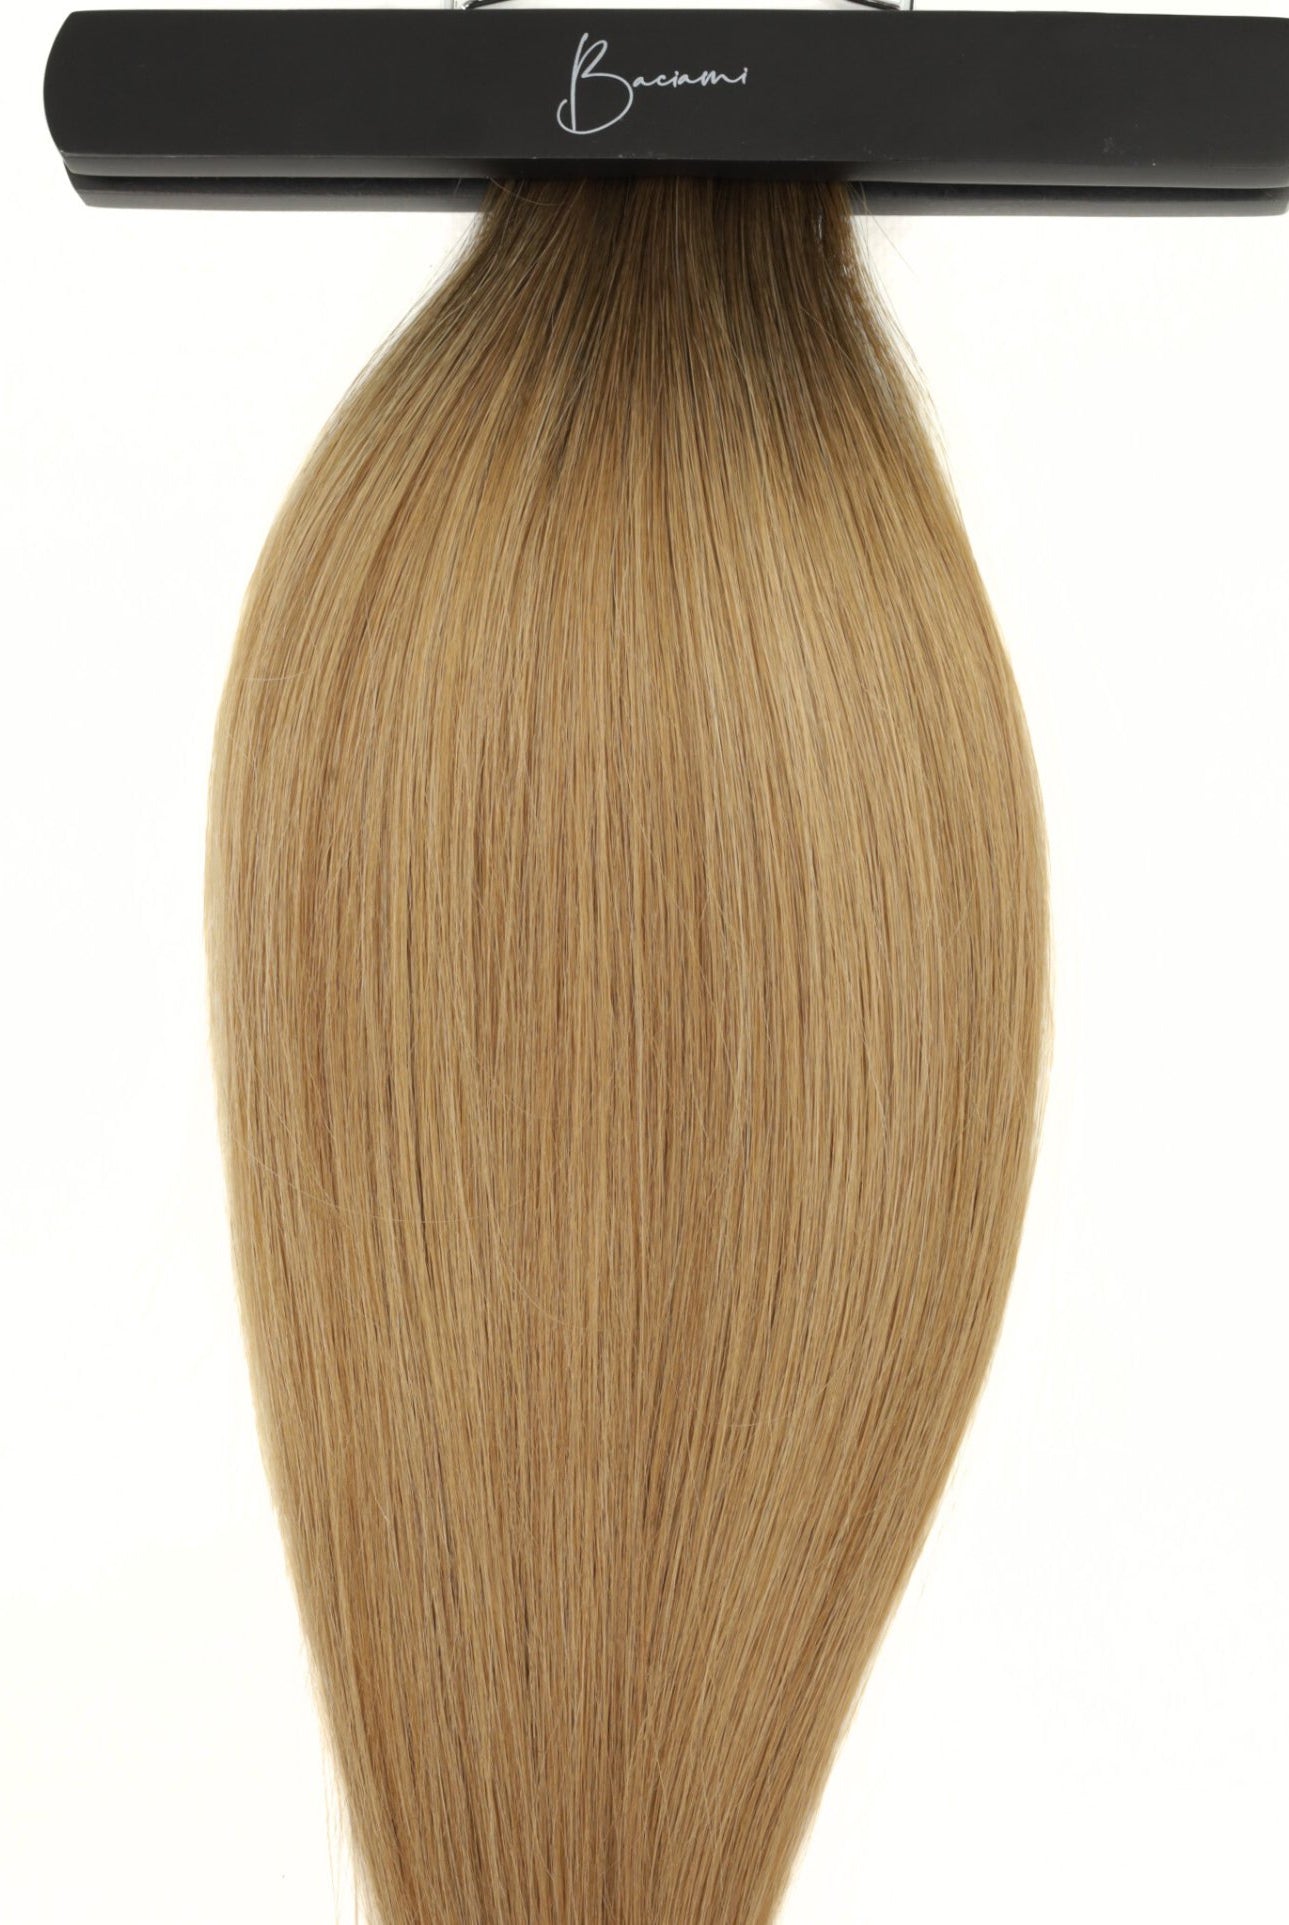 Willow (ombre)- Genius weft - Baciami® Hair Extensions